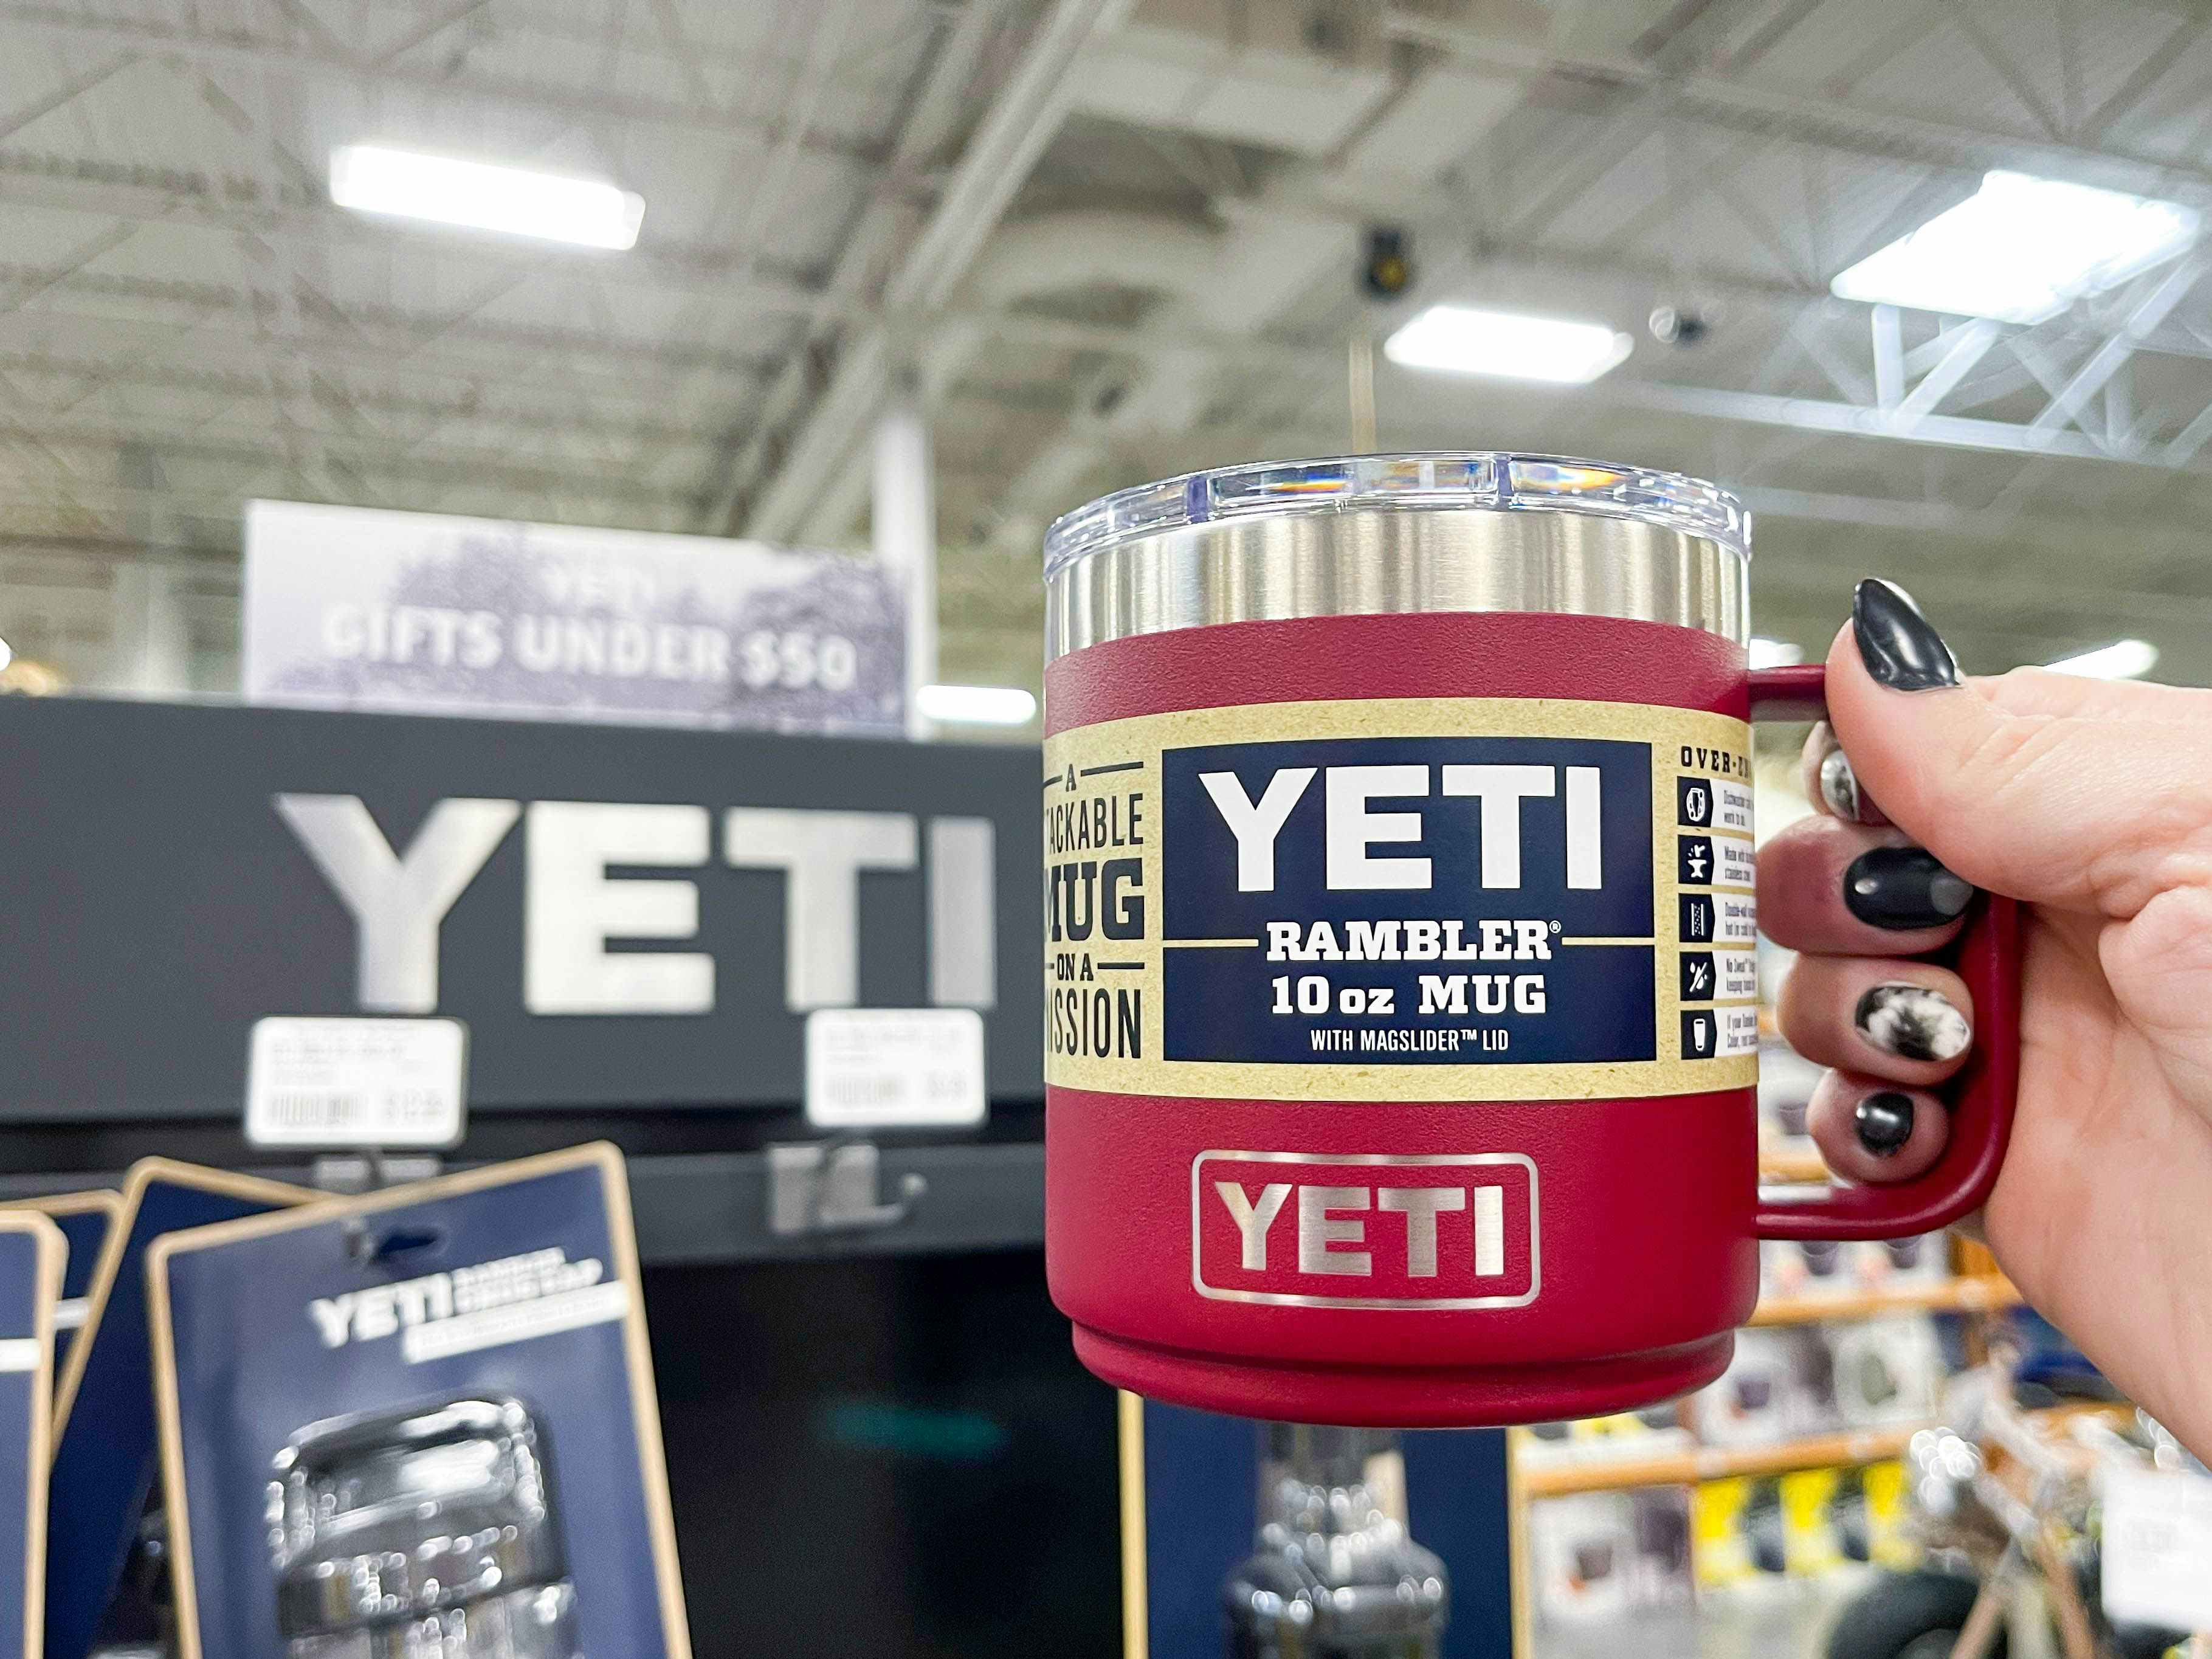 Exchange - Chill Out! 25% Off Yeti Flash Sale >  Get  your Yeti now! Gift it or keep it. Today only, take 25 percent off Yeti  tumblers, bottles, mugs, lids, coolers